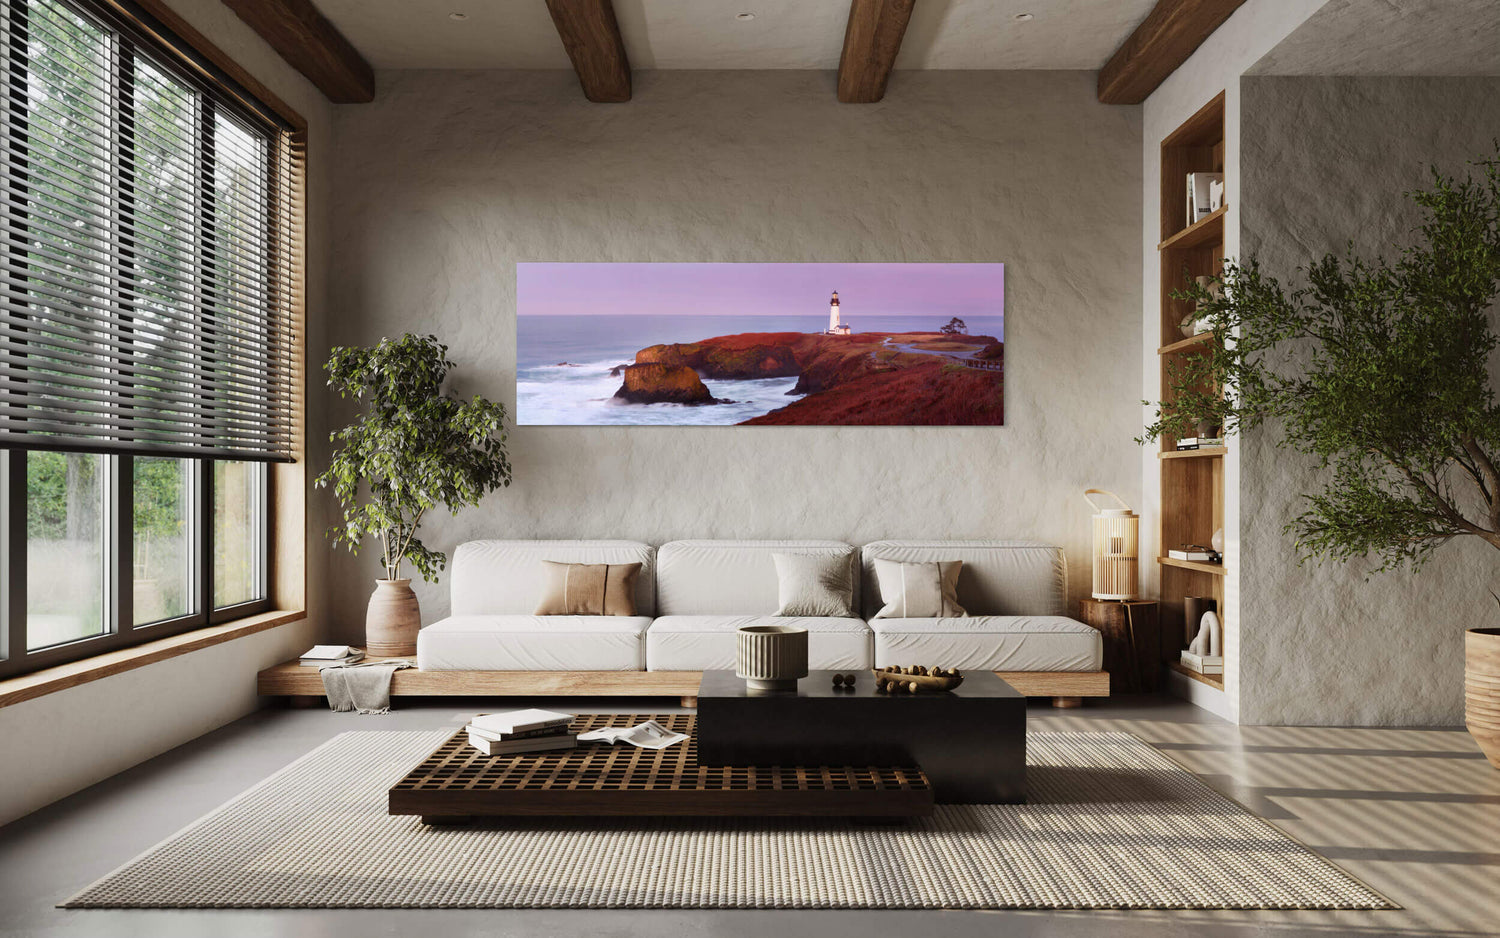 A piece of Oregon art showing the Yaquina Head Lighthouse in Oregon hangs in a living room.